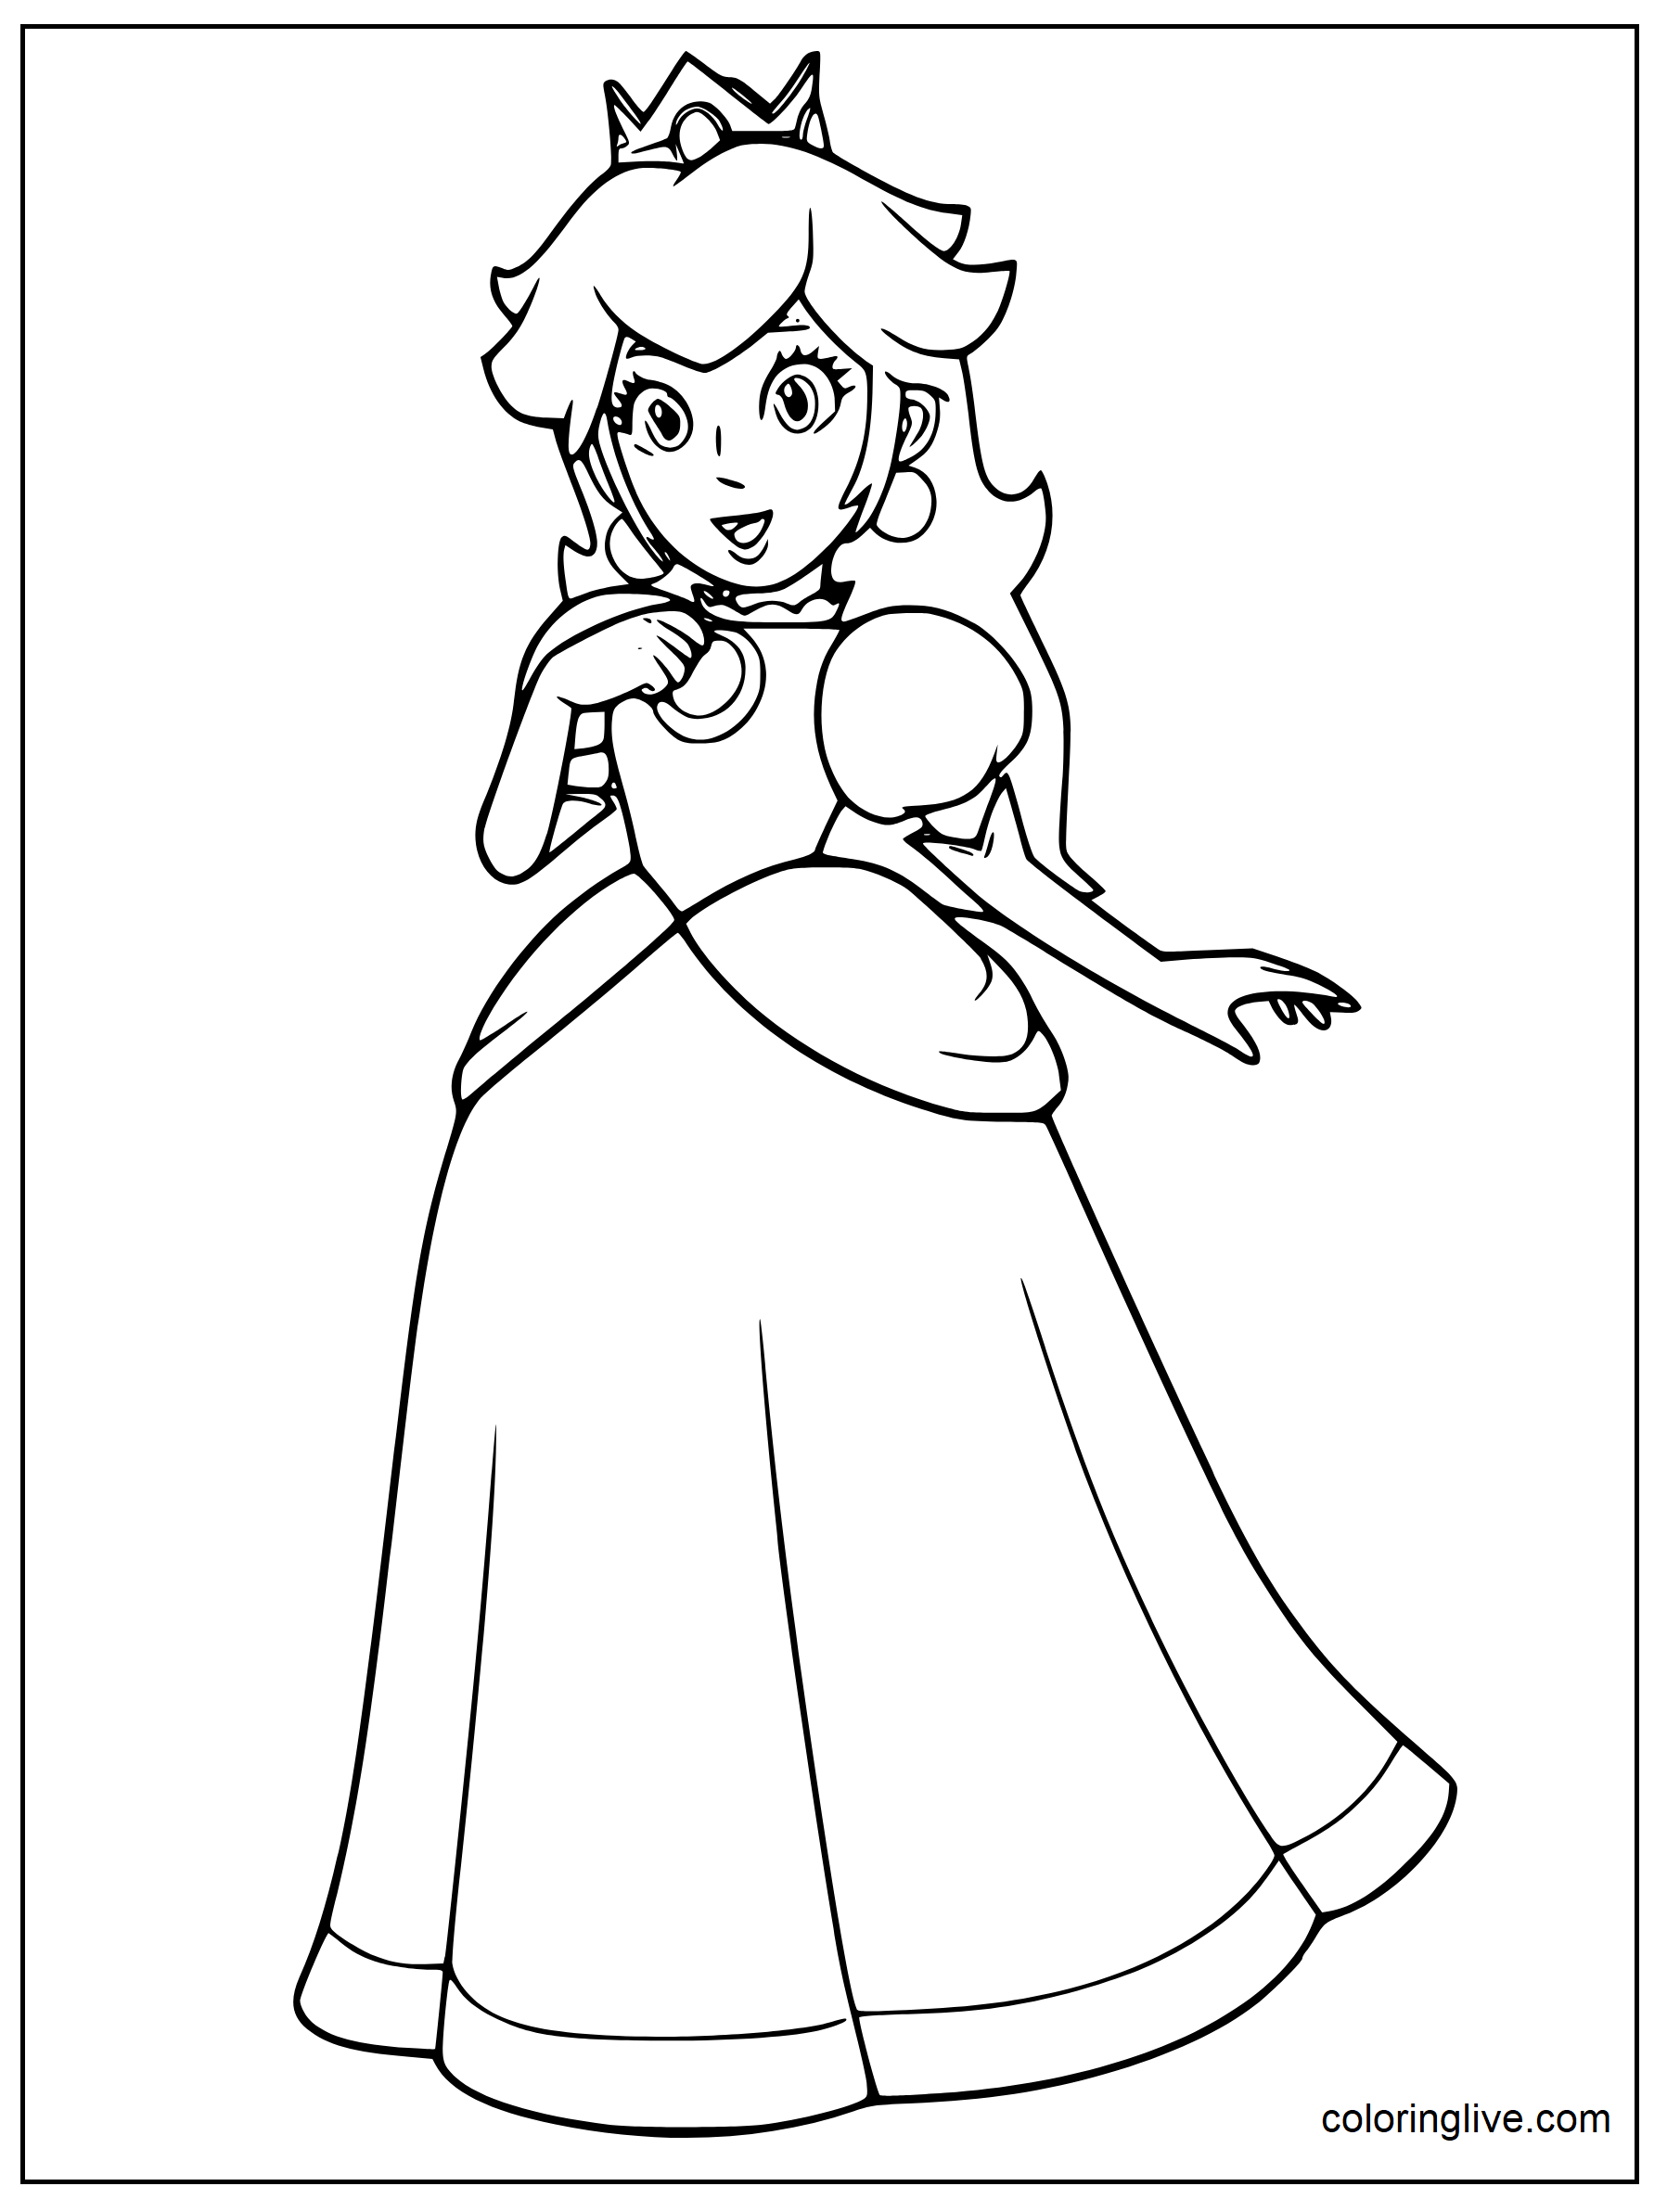 Printable Beautiful Princess Peach Coloring Page for kids.